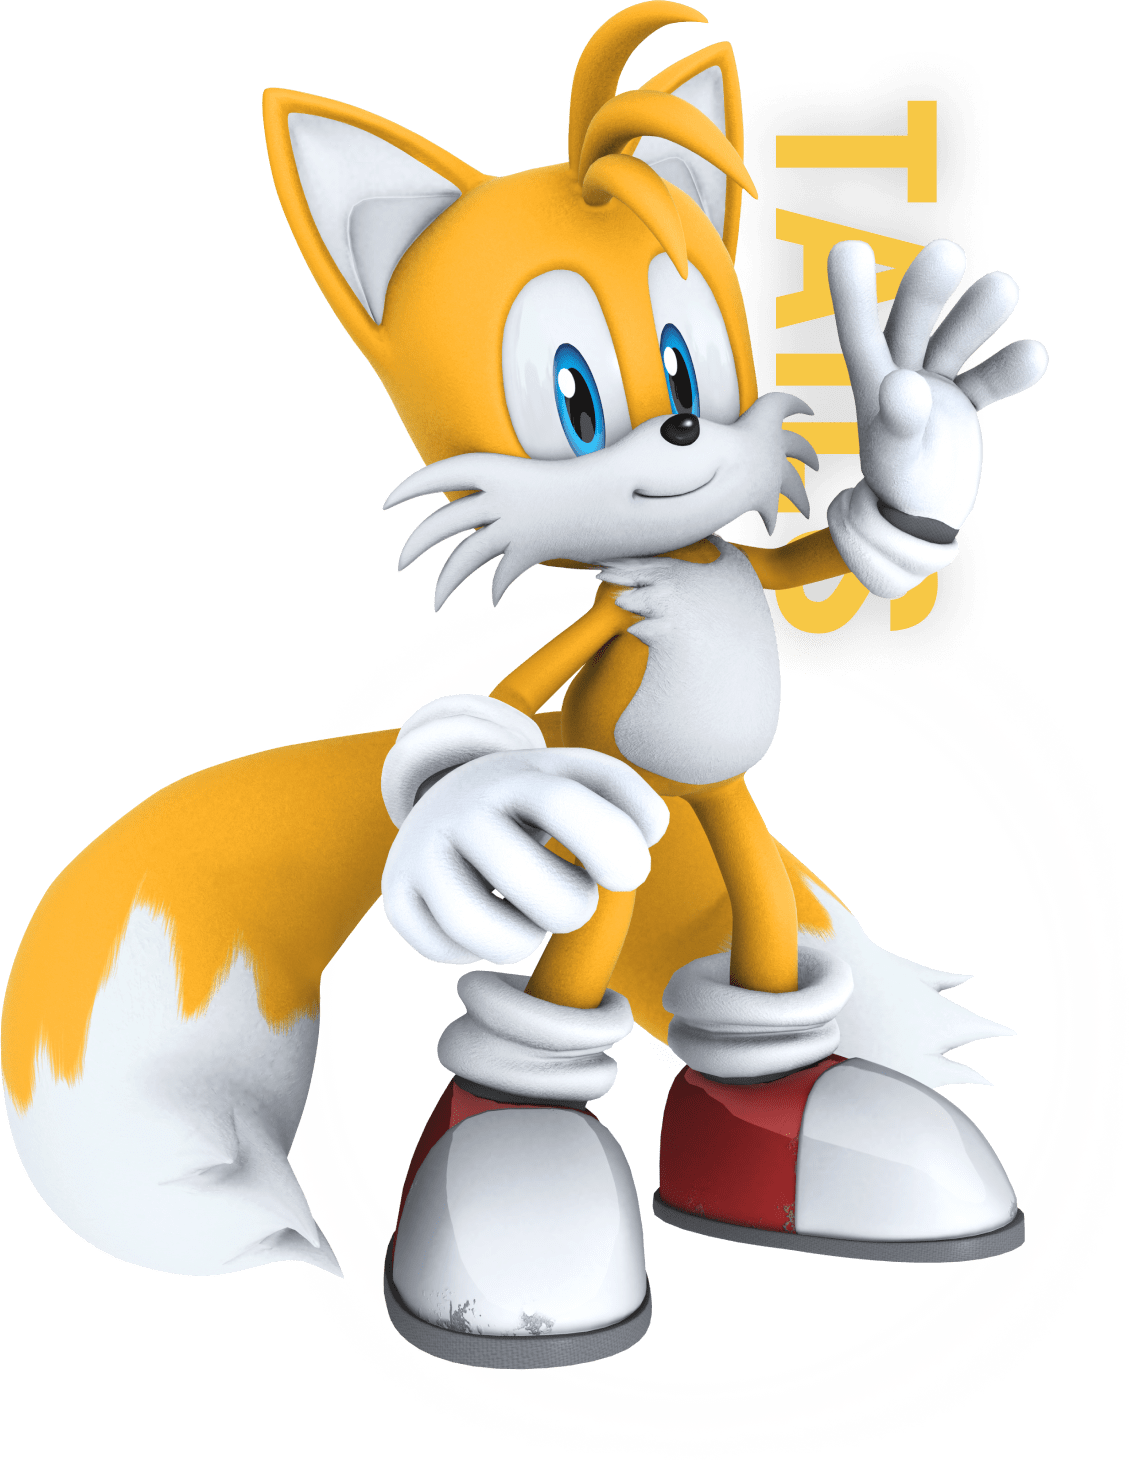 Main character photo image tails@2x